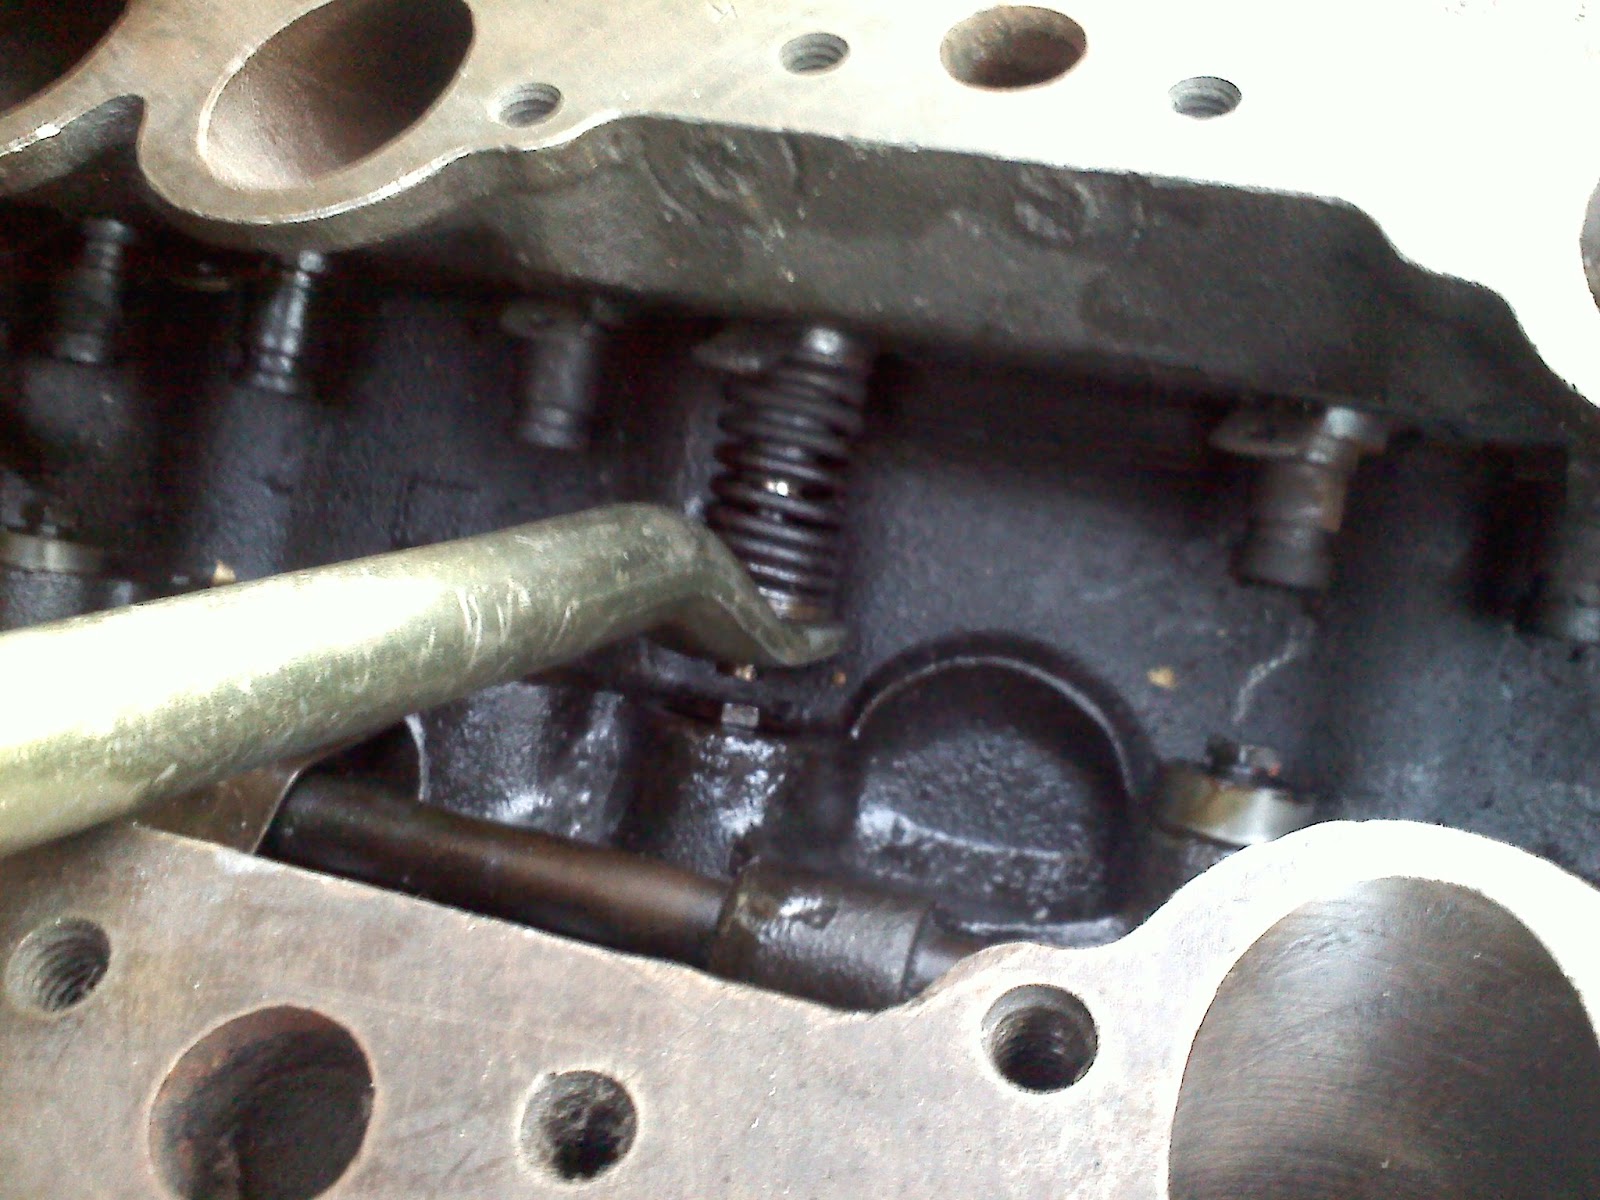 Removing valves from flathead ford